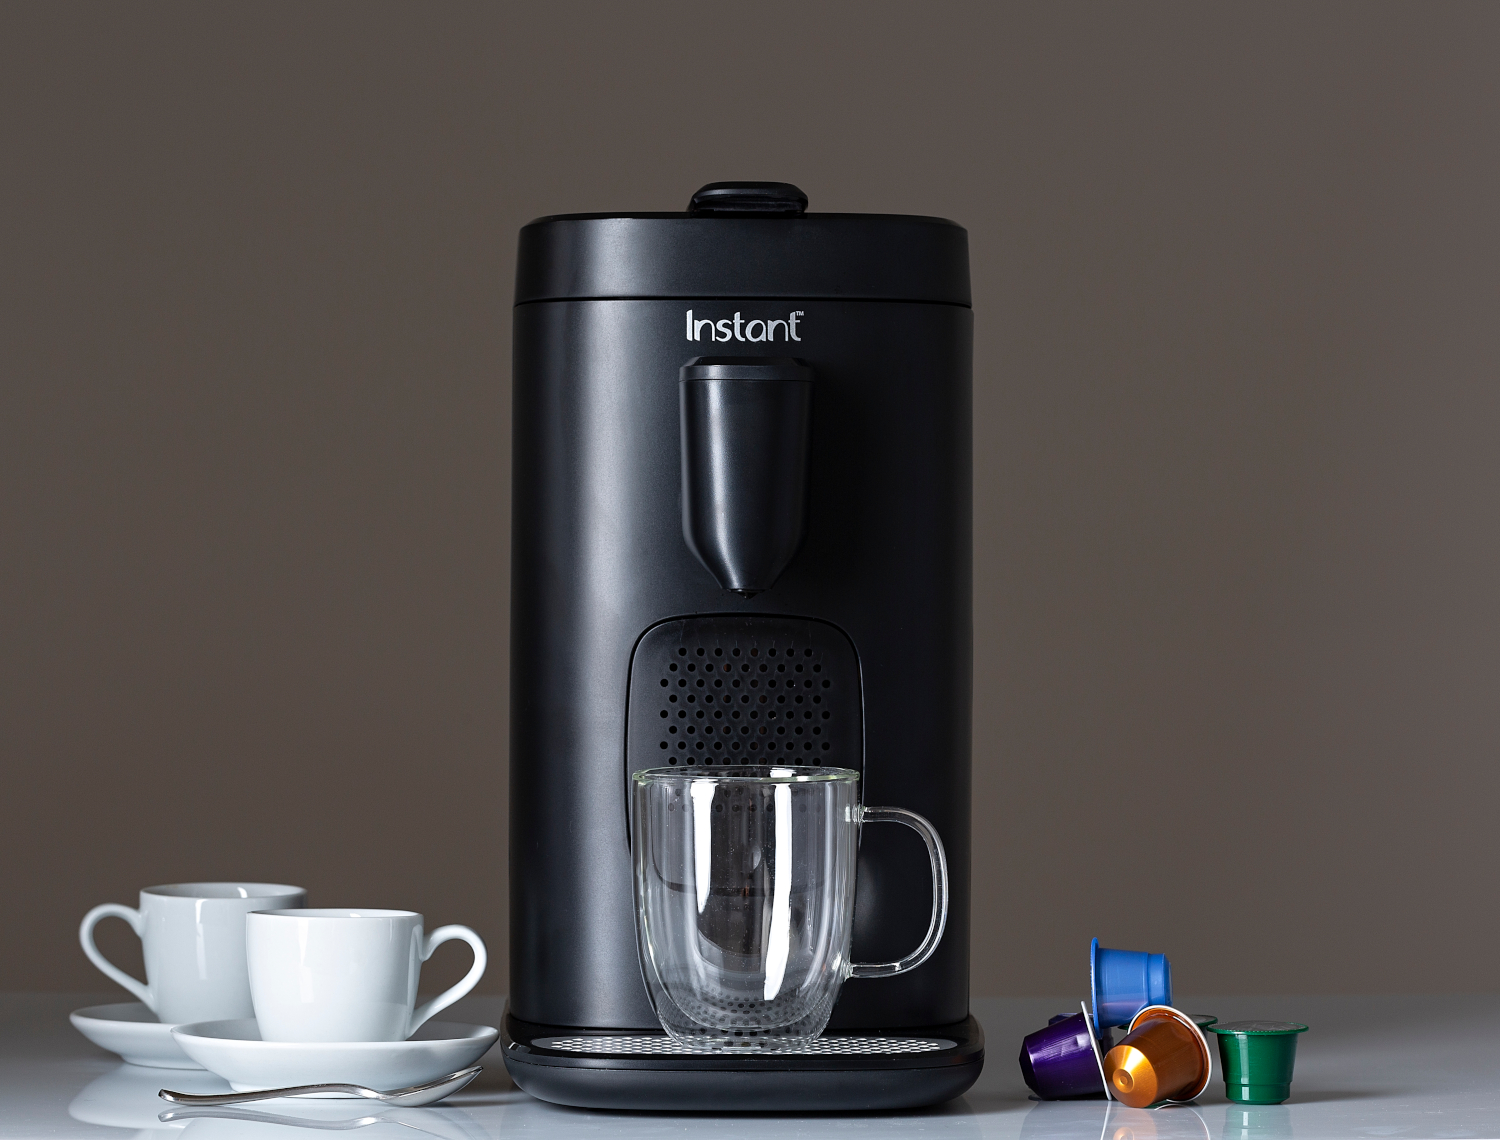 Instant Pod Review - Instant Pot Coffee Maker + Video - TwoSleevers